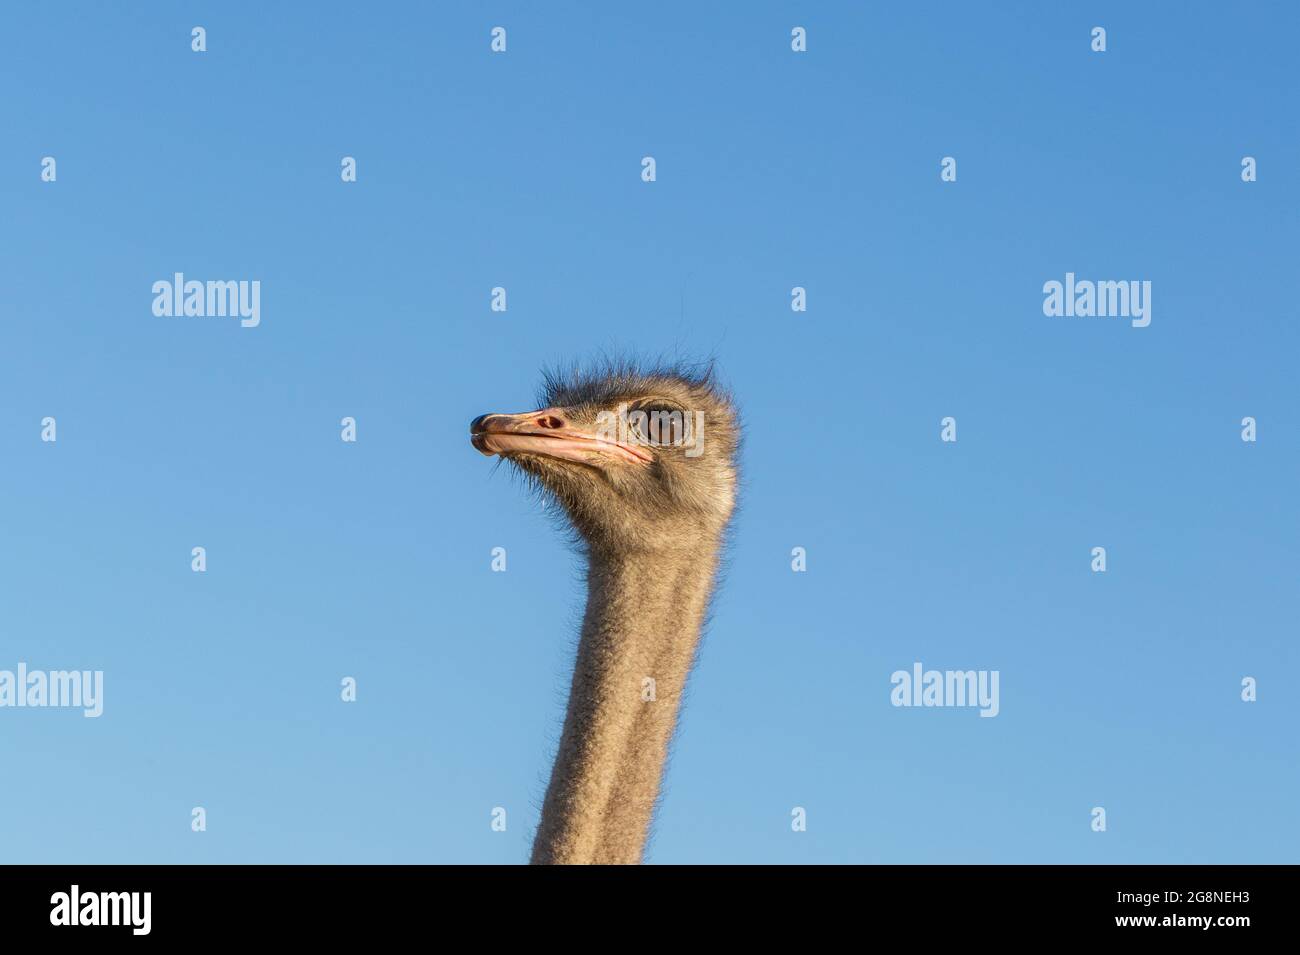 Portrait of the head of a common ostrich (Struthio camelus) near Tulbagh in the Western Cape of South Africa Stock Photo